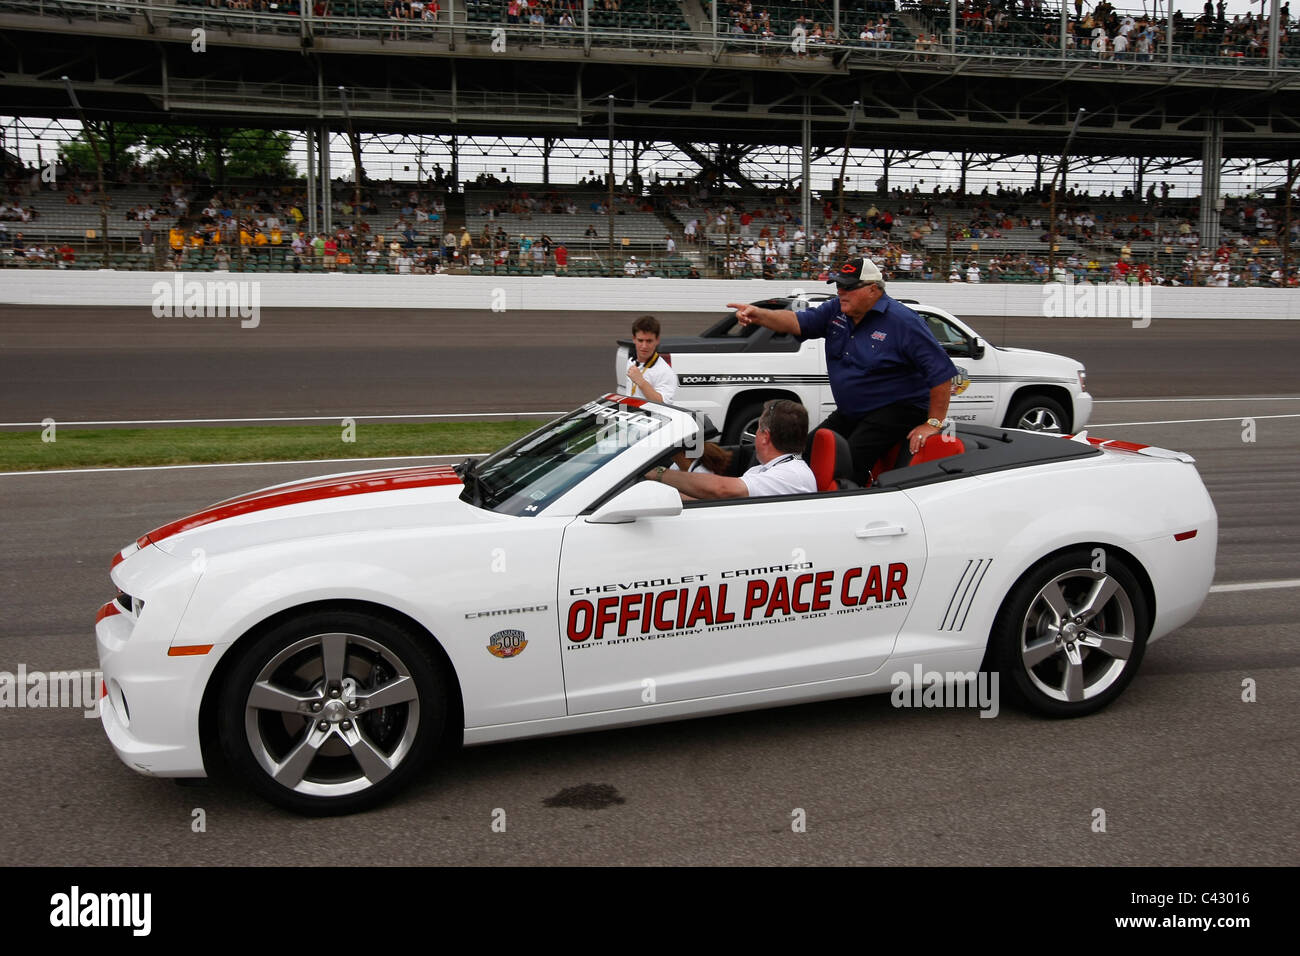 Scenes from the 100th edition of the Indy 500 motor race at the Motor Speedway, Indianapolis,USA Stock Photo